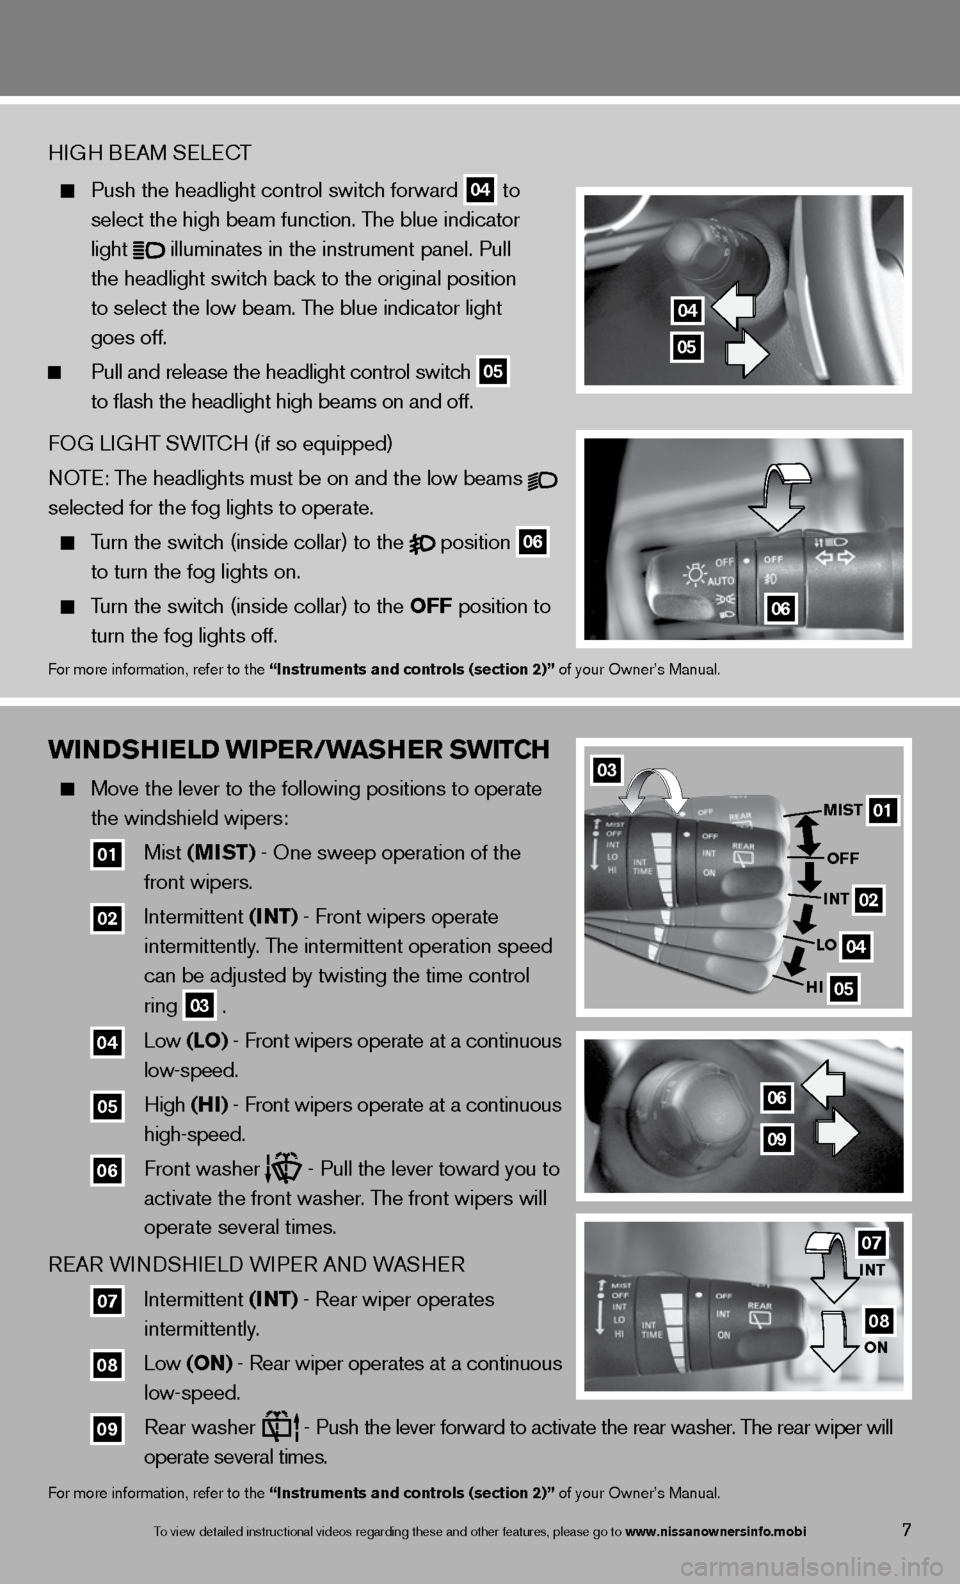 NISSAN ARMADA 2013 1.G Quick Reference Guide WinDshiEl D WiPEr/W ashEr sW itCh
   Move the lever to the following positions to operate 
    the windshield wipers:   
  
01 Mist  (mist) - One sweep operation of the   
     front wipers.  
  
02 i